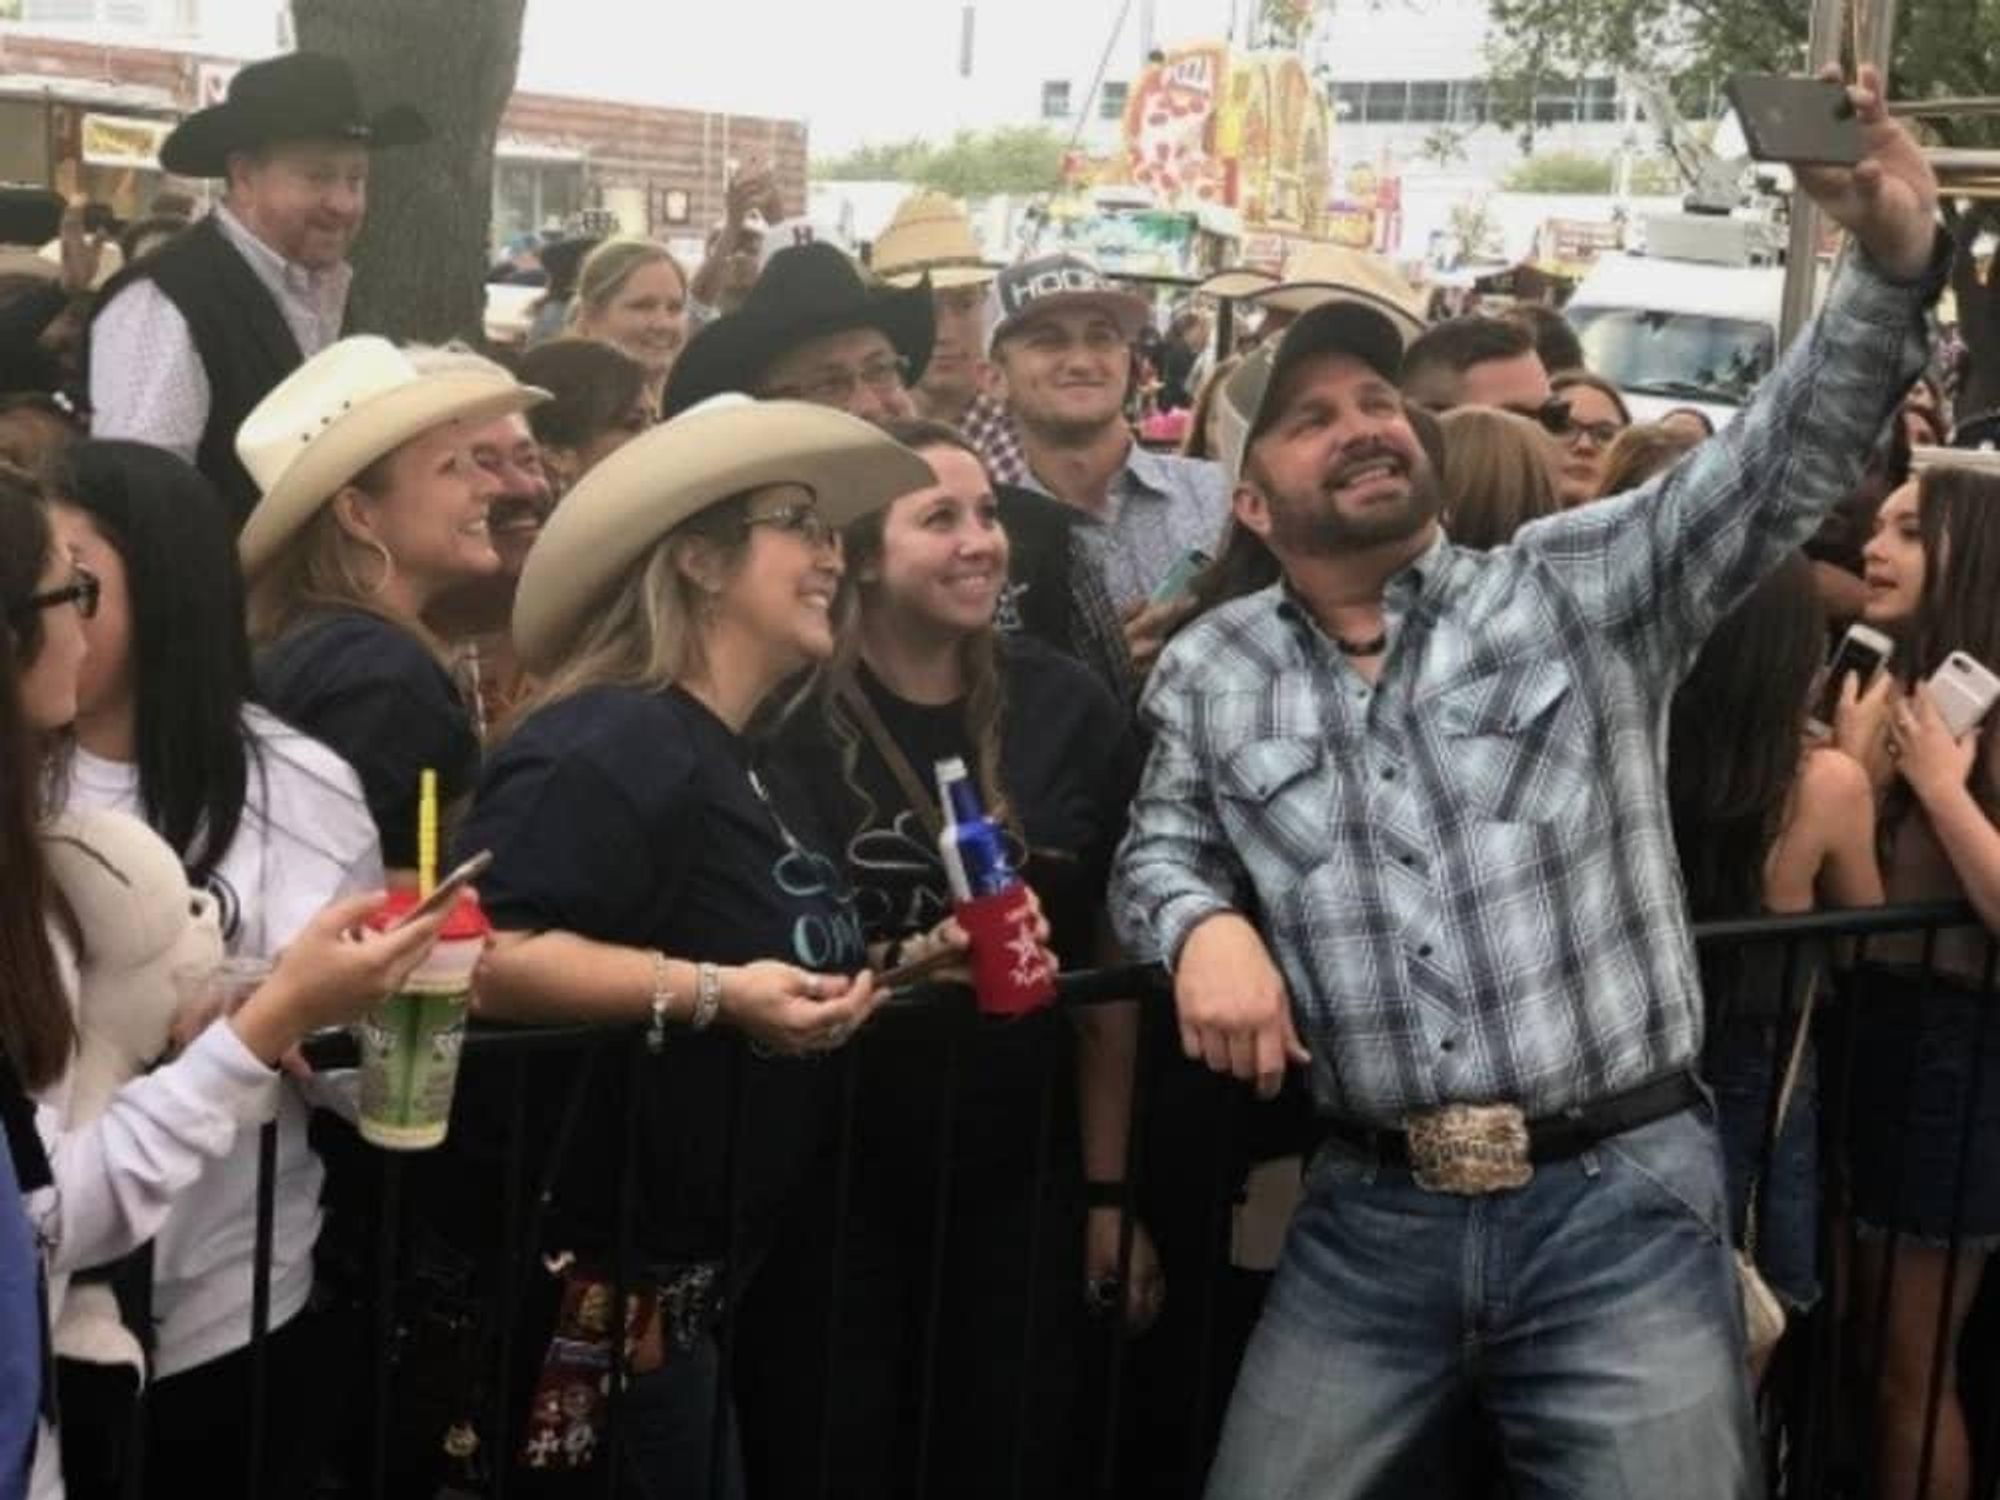 Garth Brooks poses for selfie with fans to announce RodeoHouston appearances